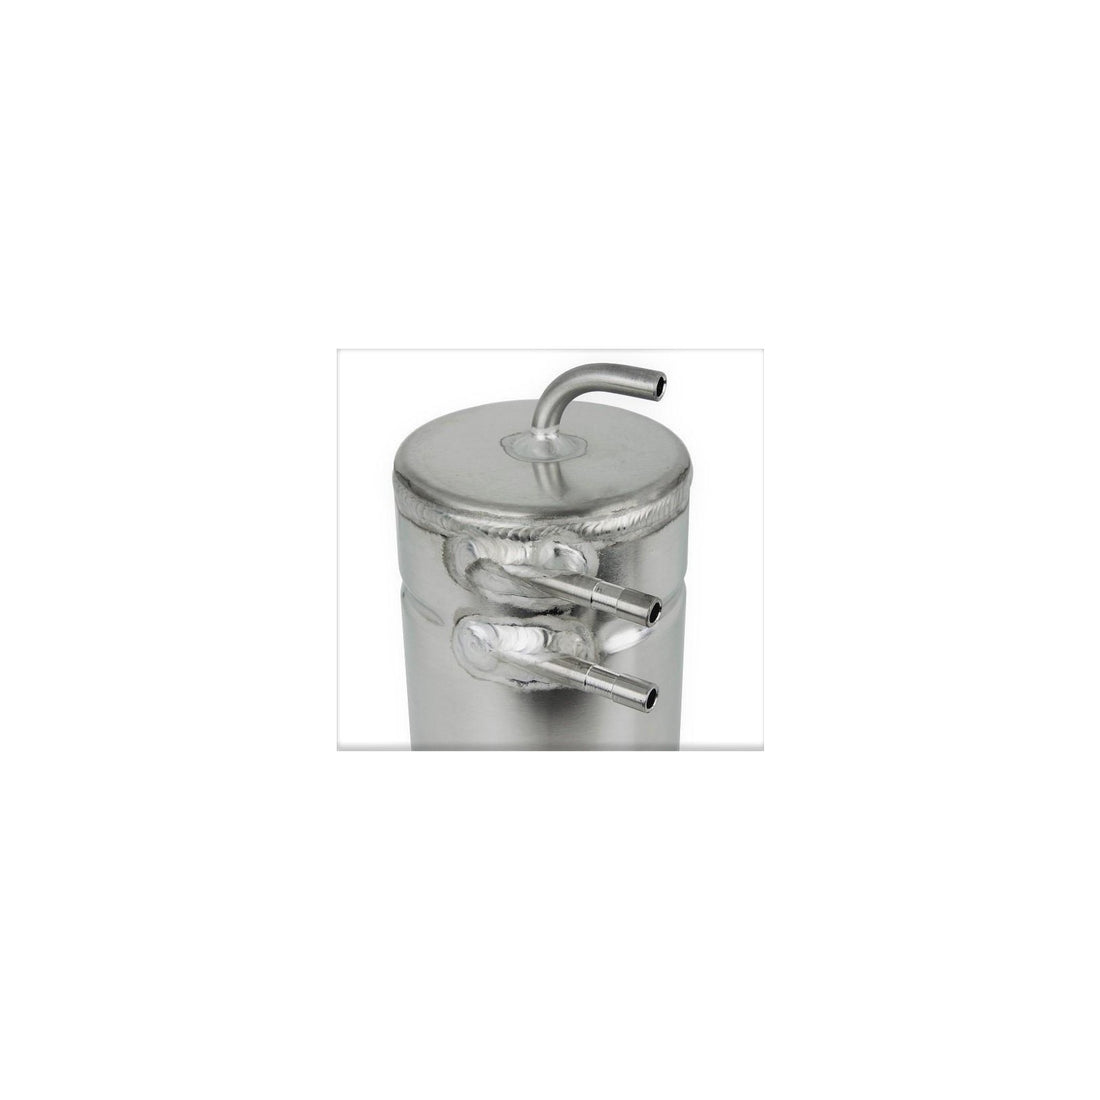 1.5 litre alloy fuel injection tank swirl pot - push on fittings